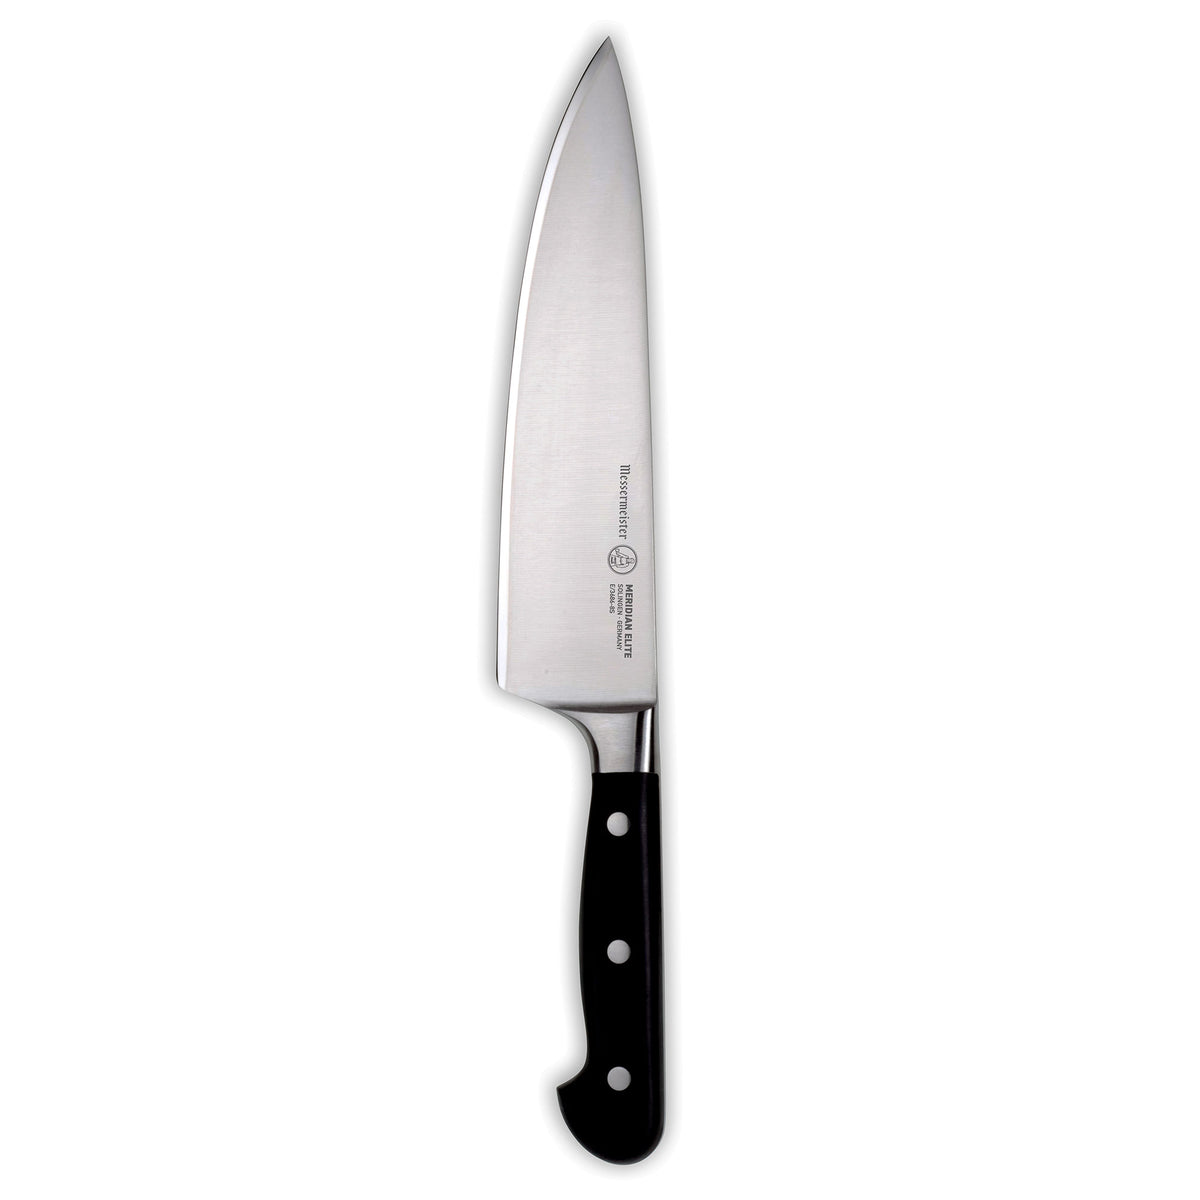 Stainless Steel Craft Knife - InexPens